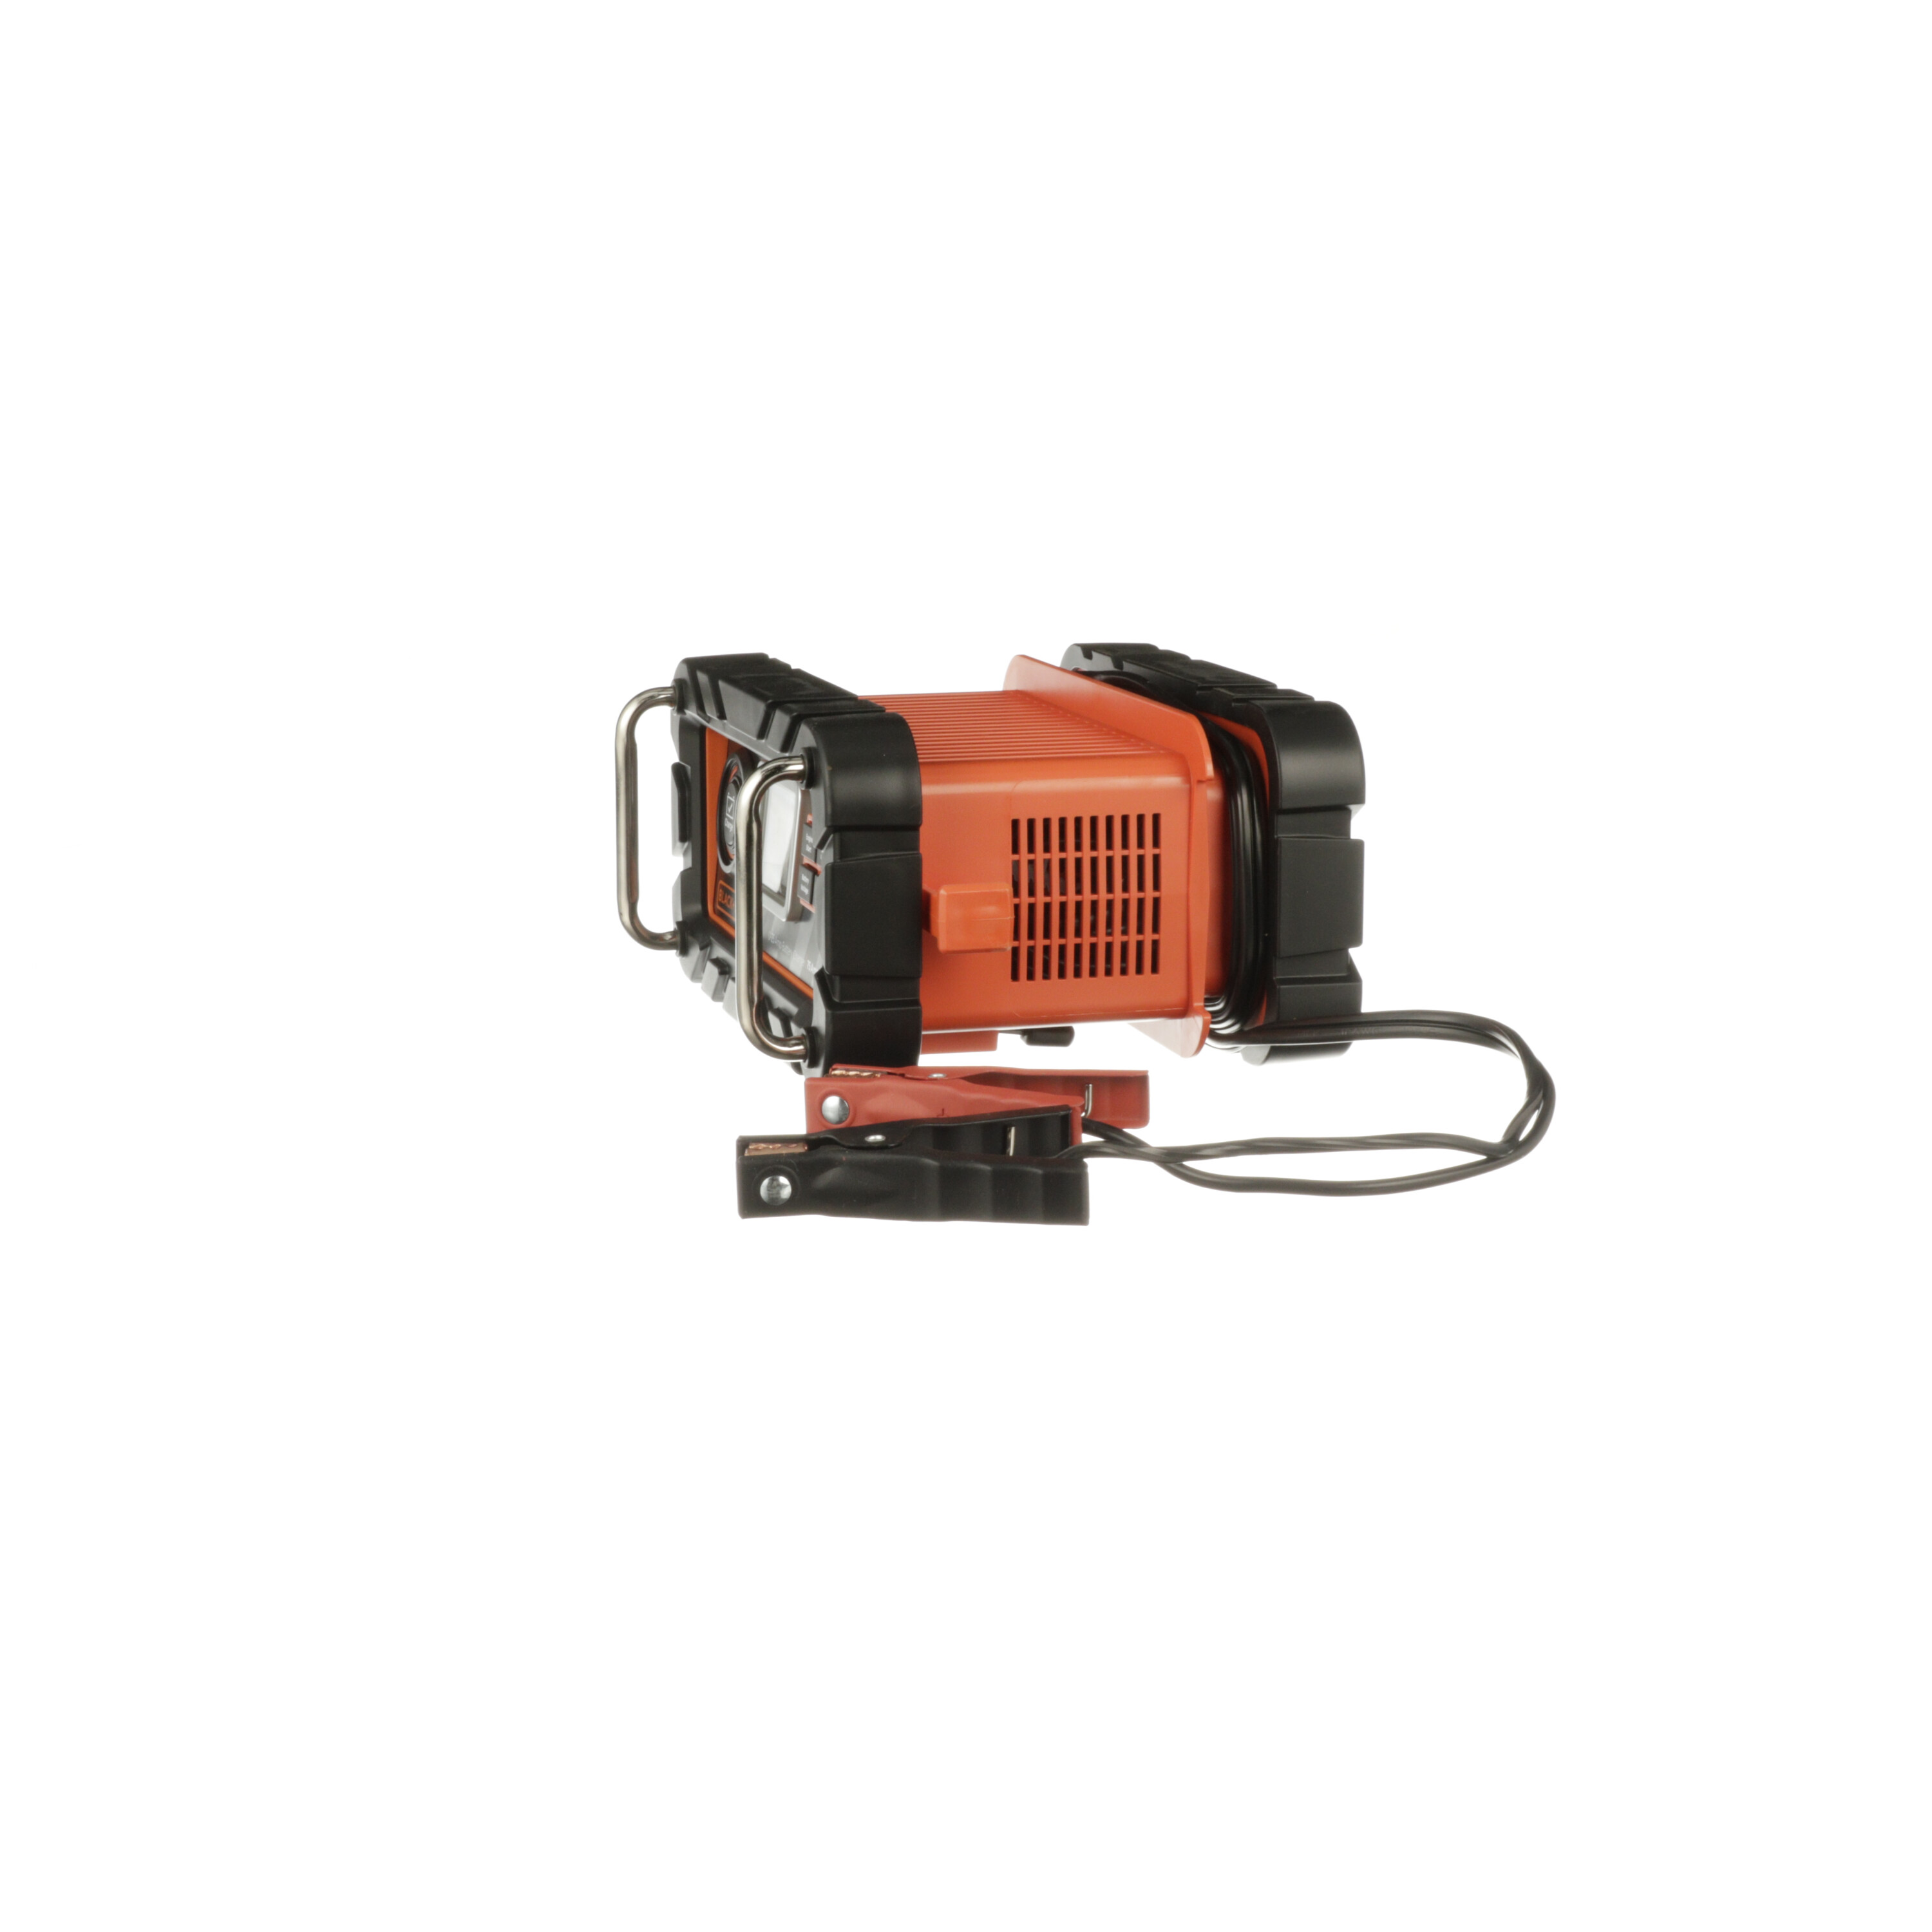 Black + Decker BC25BD 25 Amp Battery Charger with 75 Amp Engine Start 